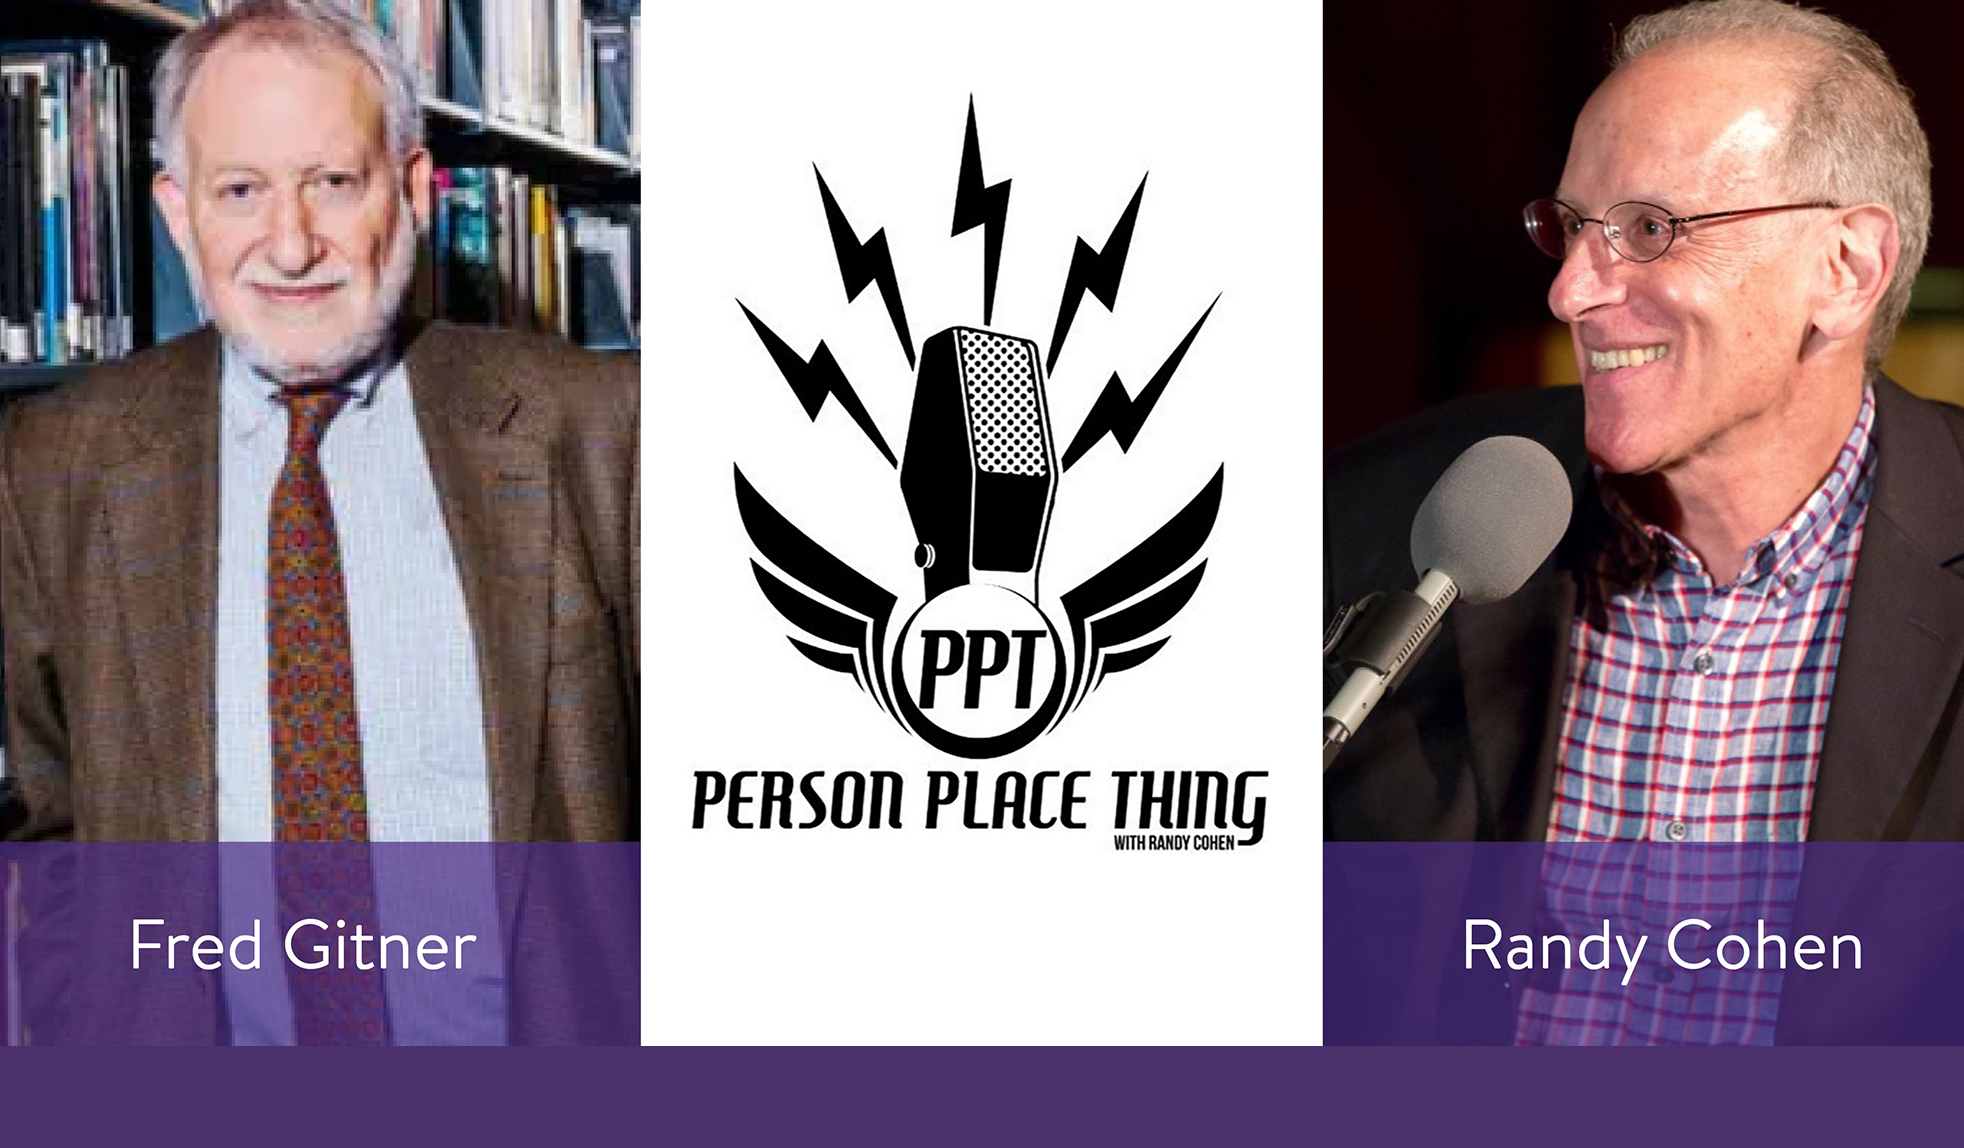 Join us live at Hunters Point Library for a special episode of "Person Place Thing" with QPL’s Fred Gitner!